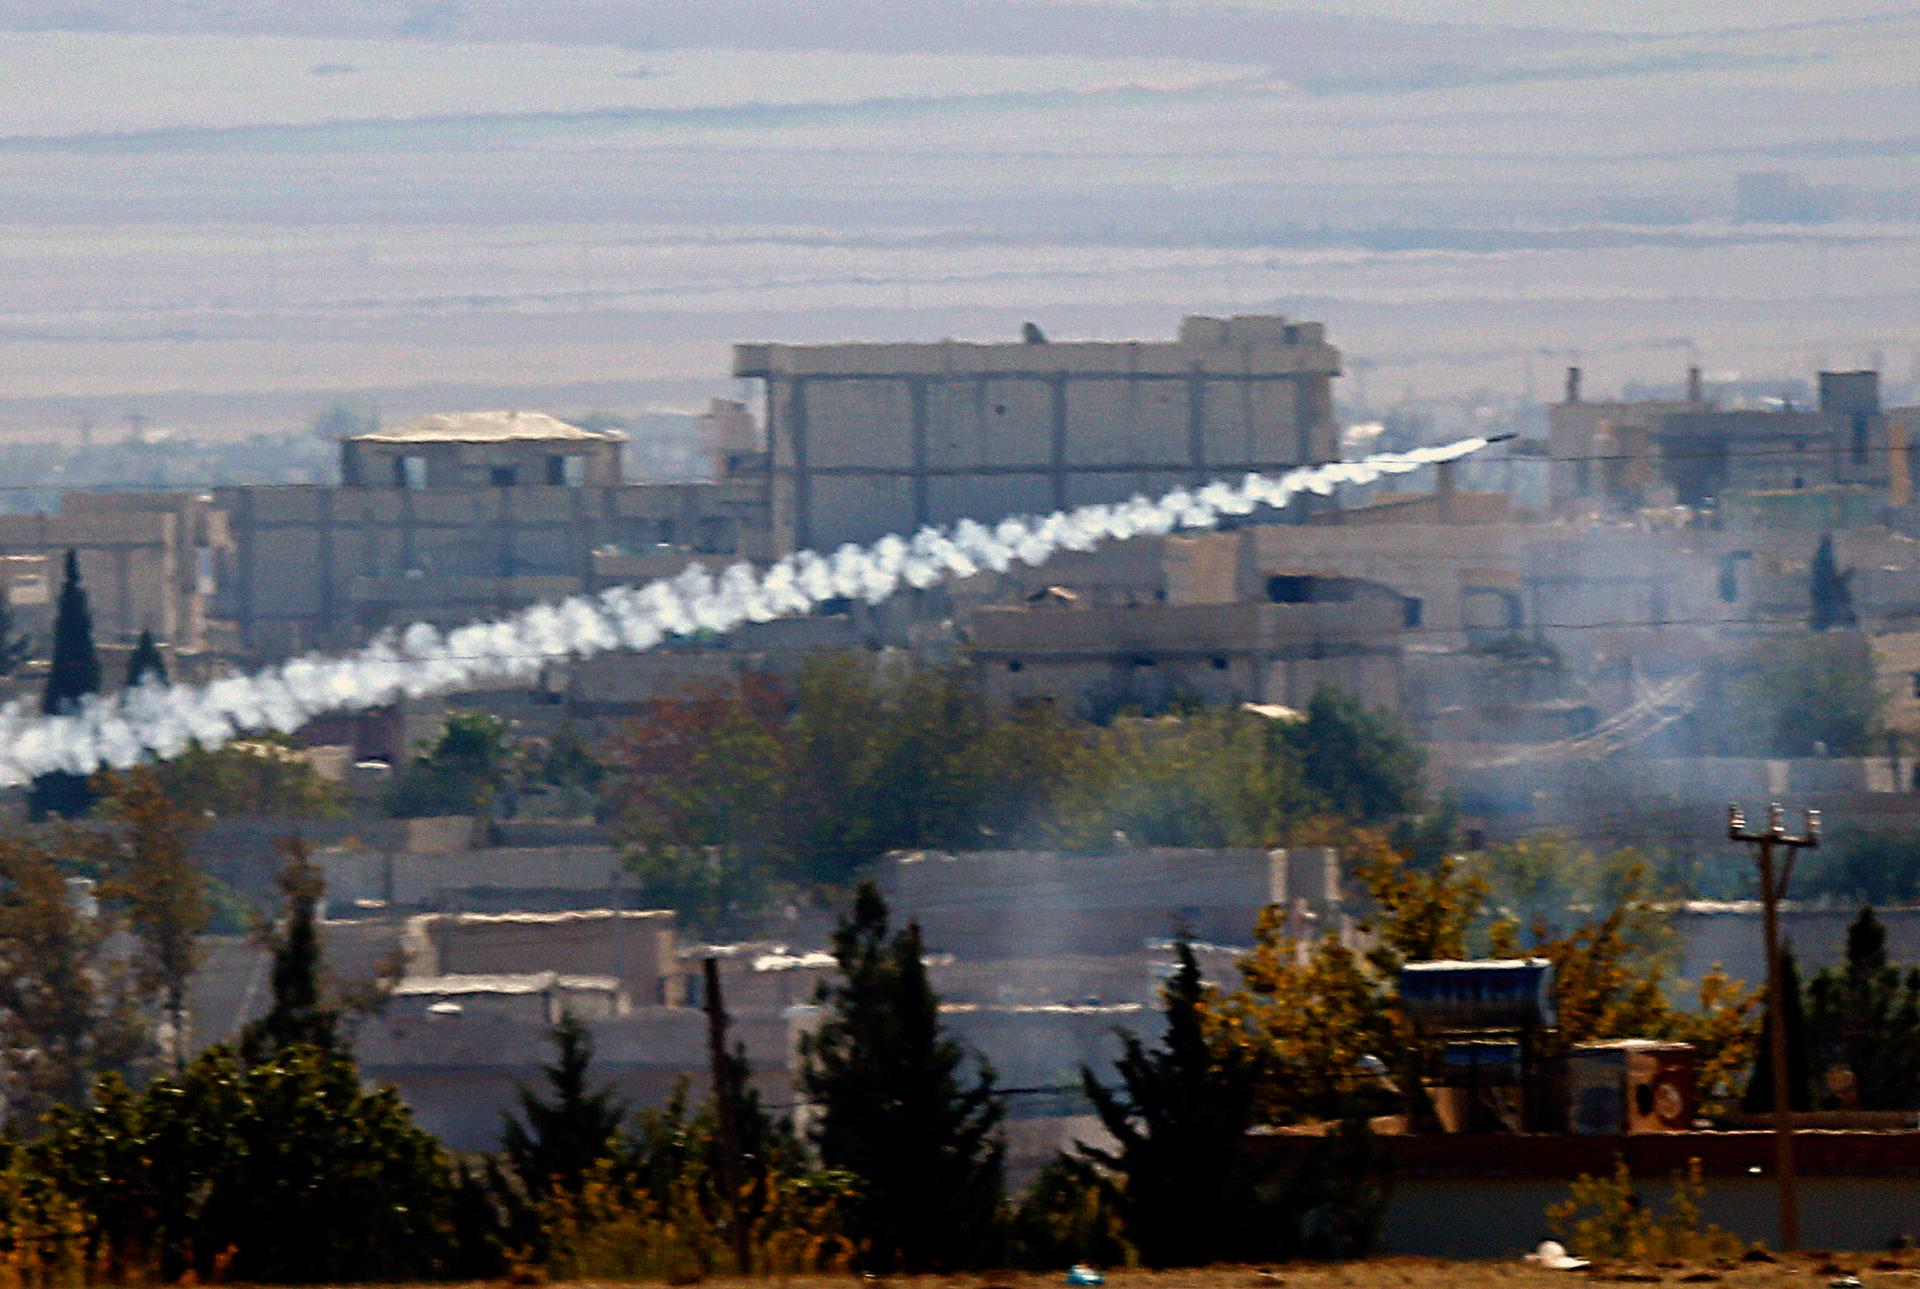 A rocket believed to have been launched by Islamic State forces flies from the east to the west side of the Syrian town of Kobani during fighting on November 6, 2014. Picture taken from the Turkish side of the Turkey-Syria border.